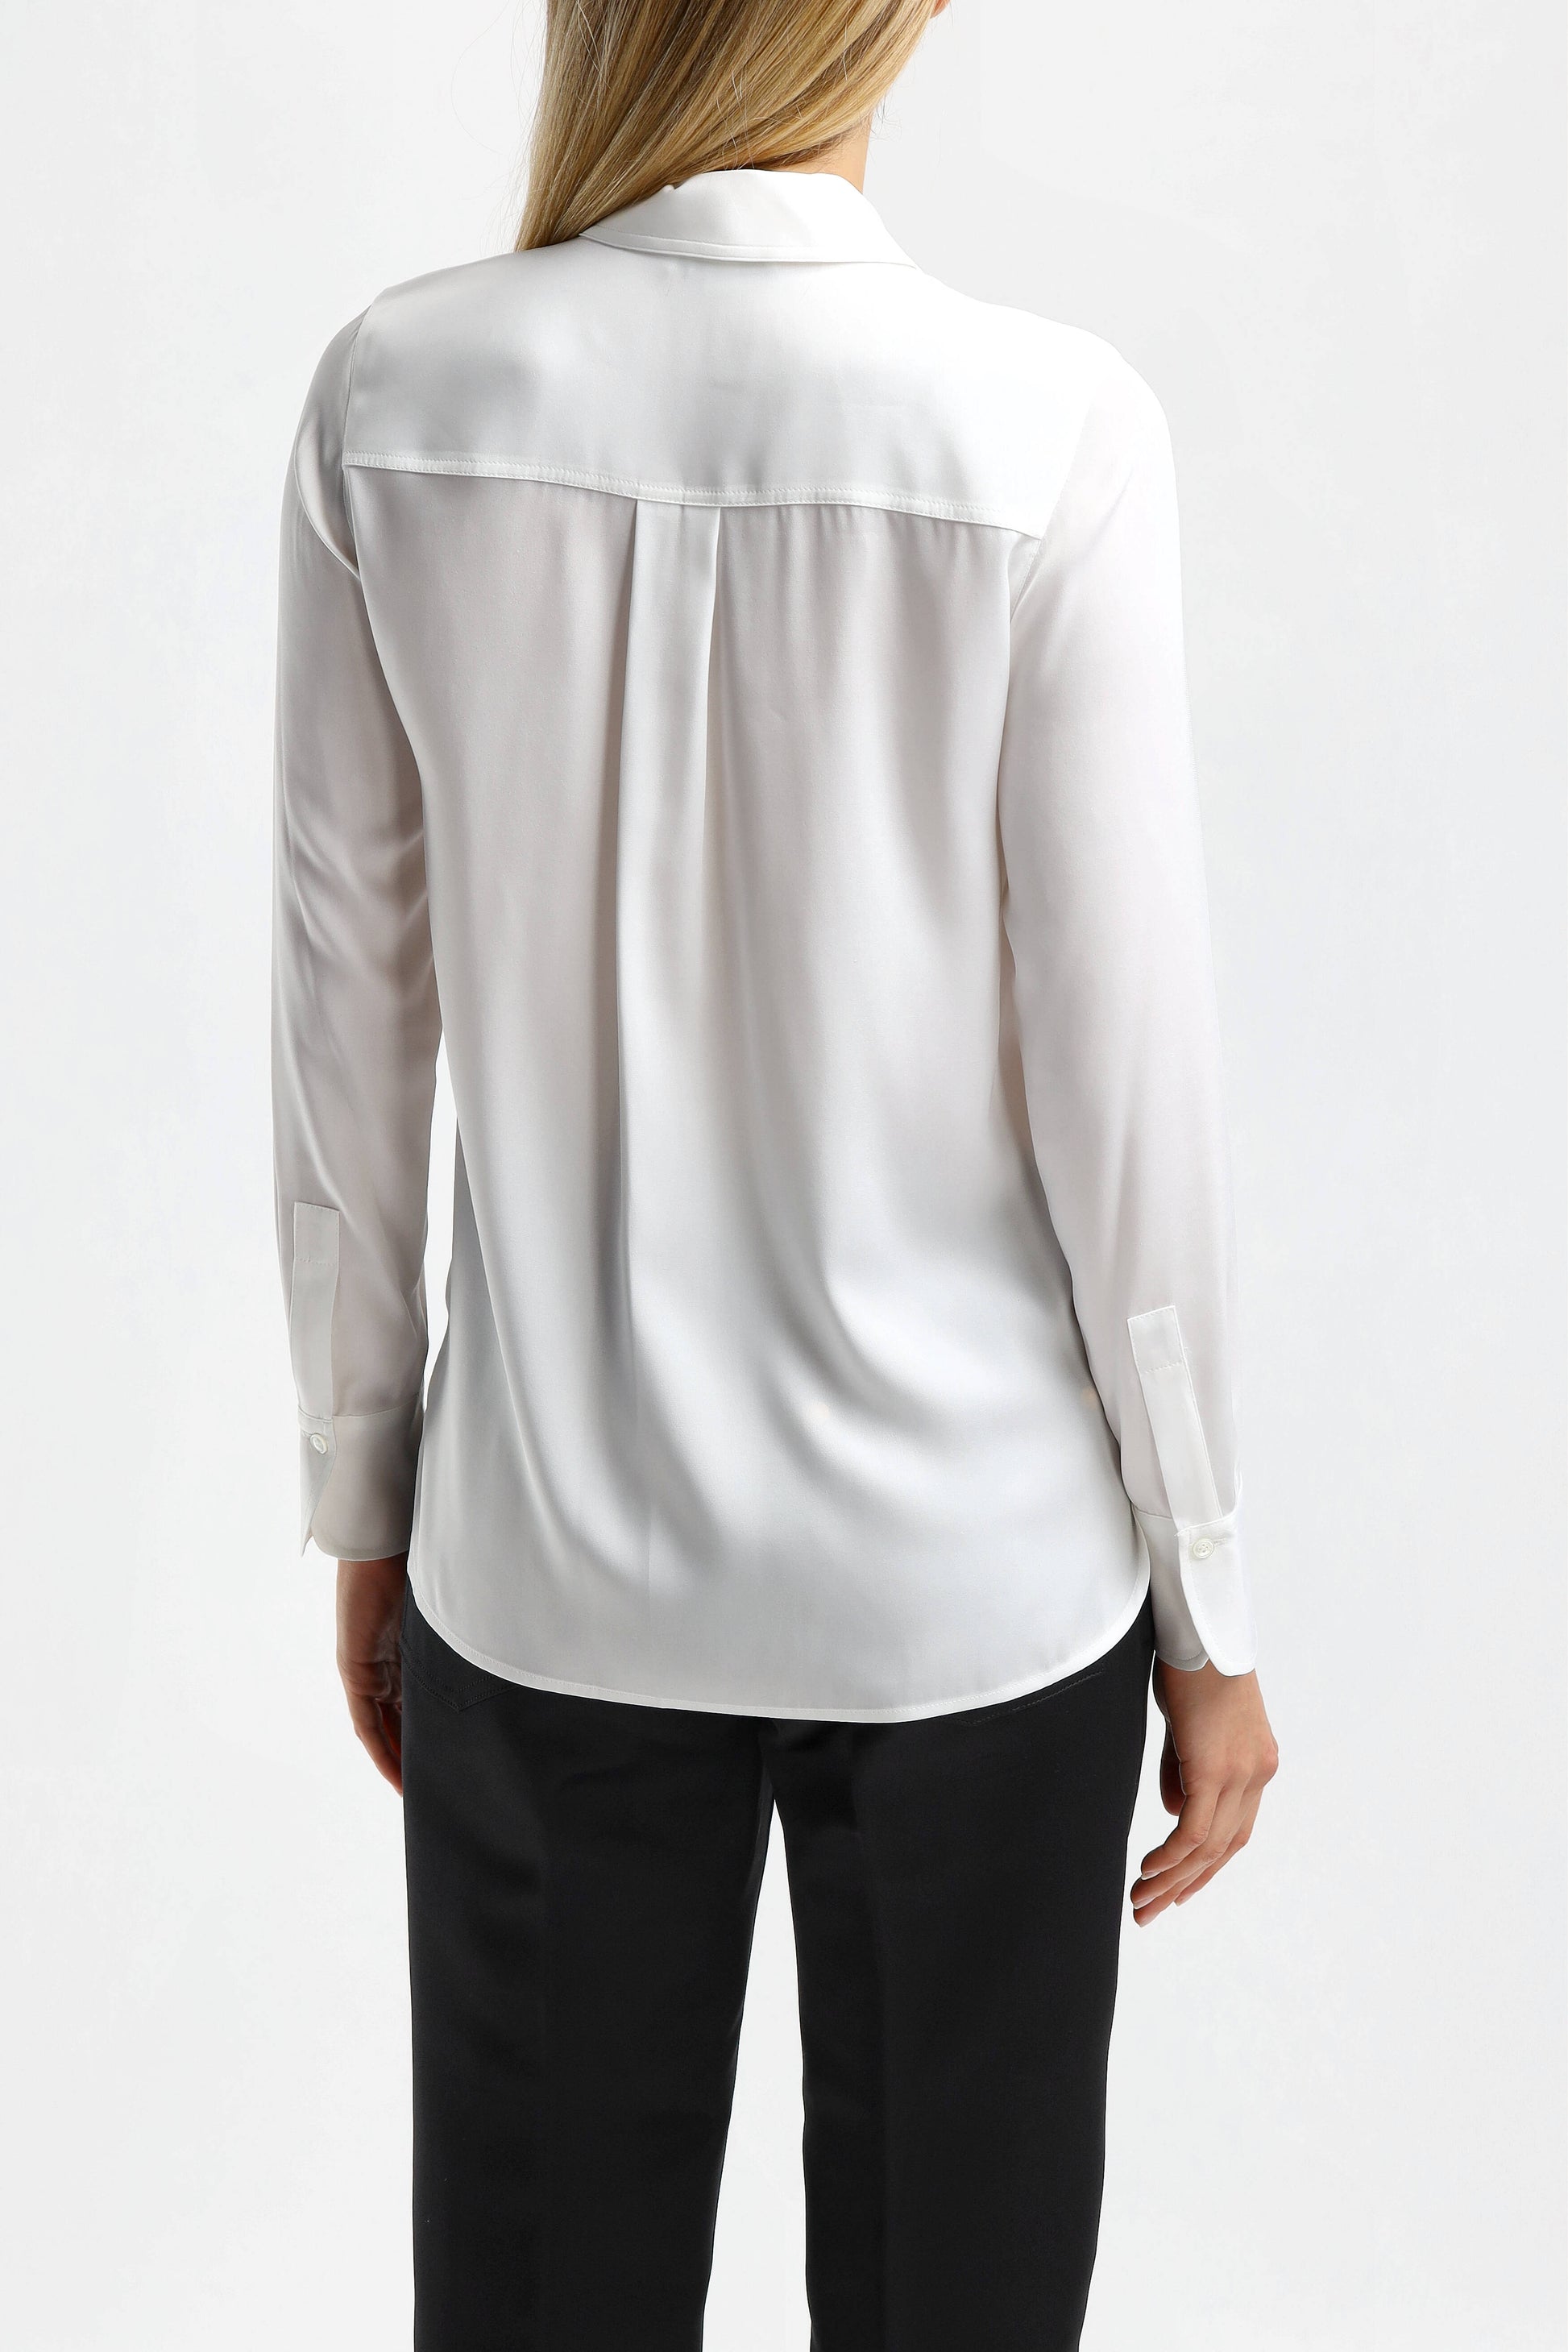 Bluse Slim Fitted in Optic WhiteVince - Anita Hass